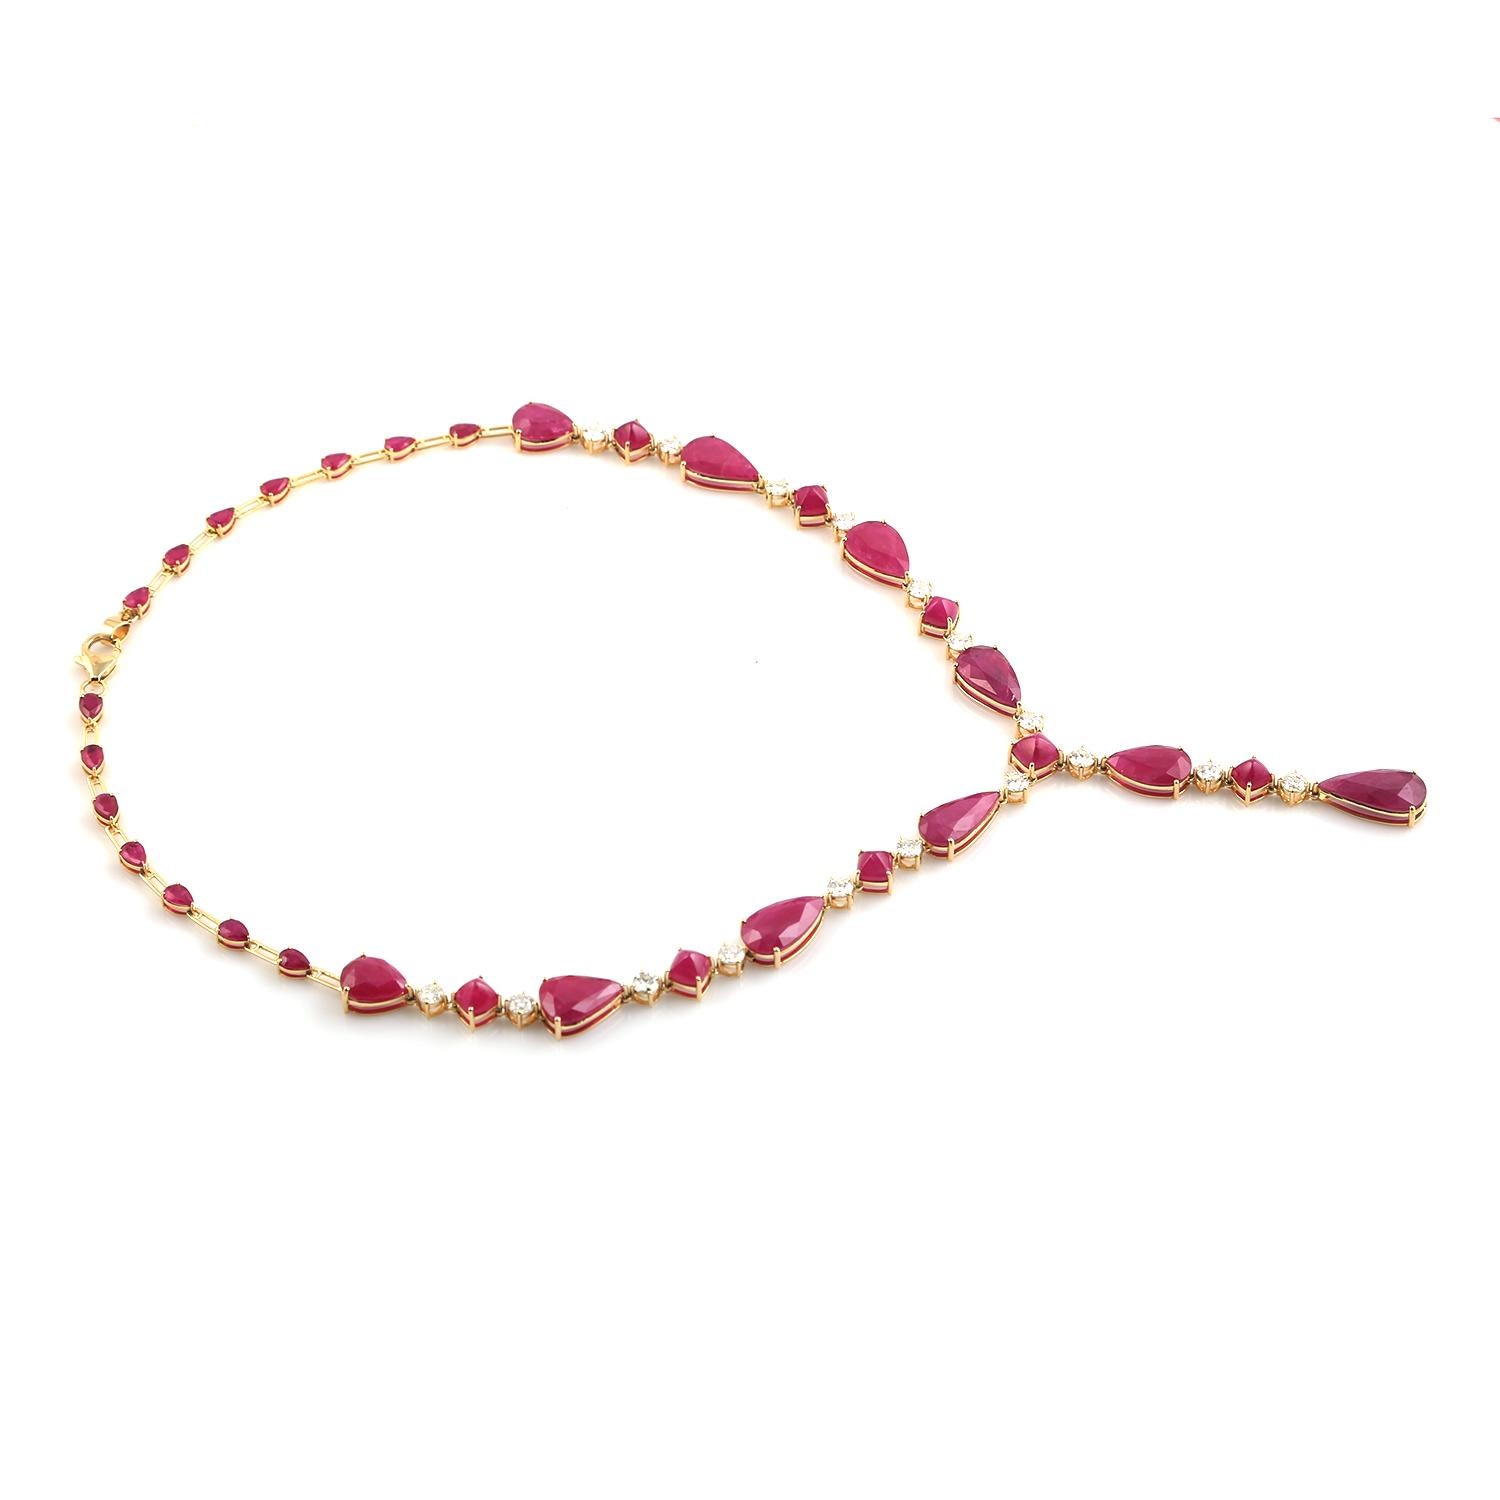 Art Deco Tear Drop Mozambique Ruby Link Necklace With Diamonds Made In 18k Yellow Gold For Sale